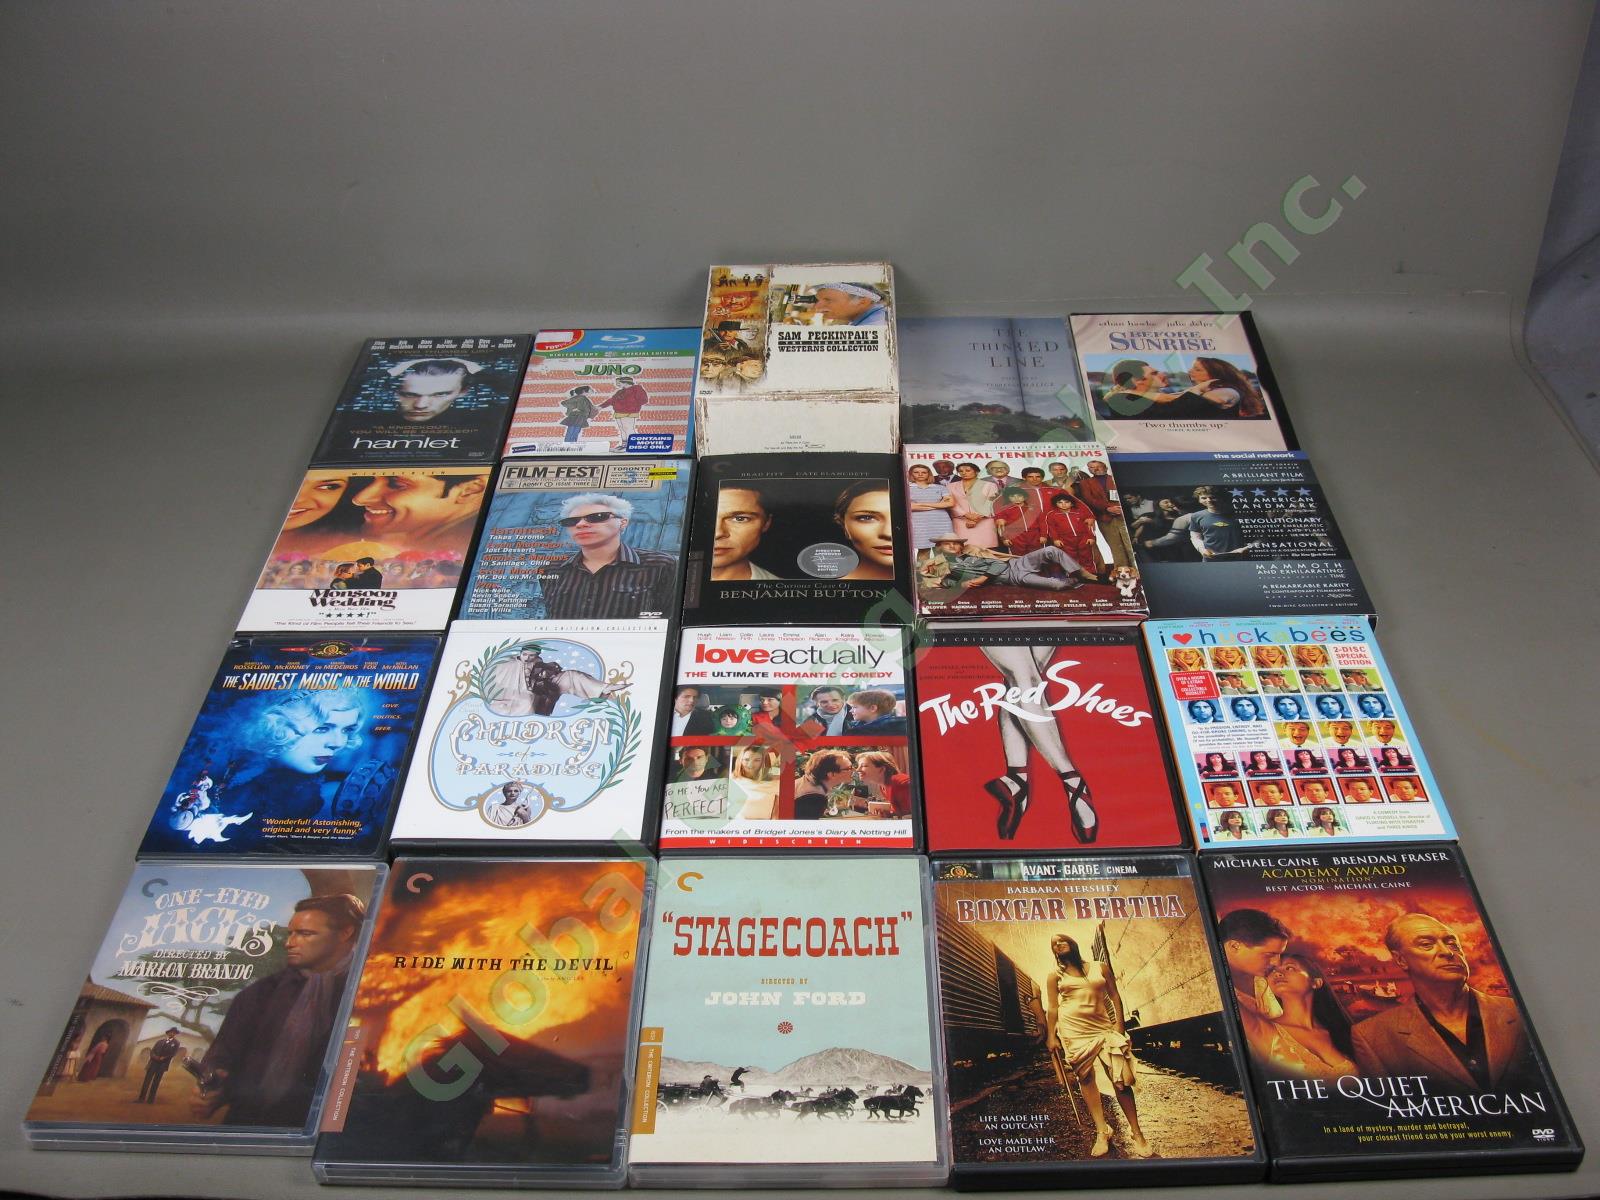 Huge DVD Lot Comedy Drama Suspense Sci Fi Thriller Western Criterion Collection 1